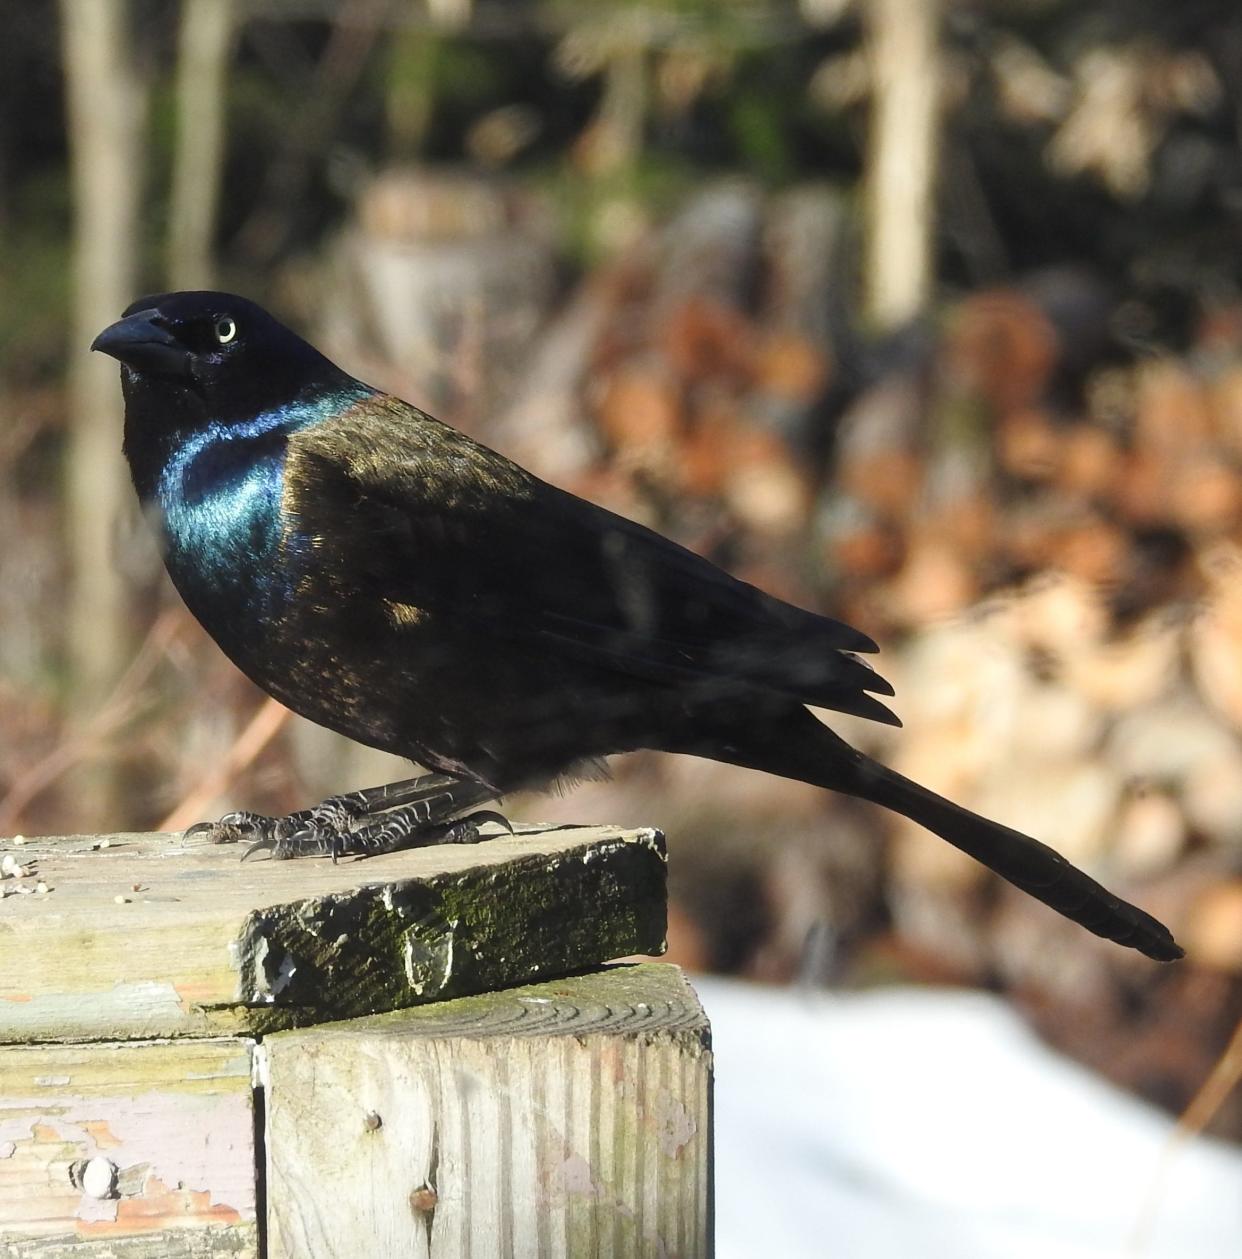 Common grackles (Quiscalus quiscula) are iridescent black birds with long tails, long beaks and relatively long legs.